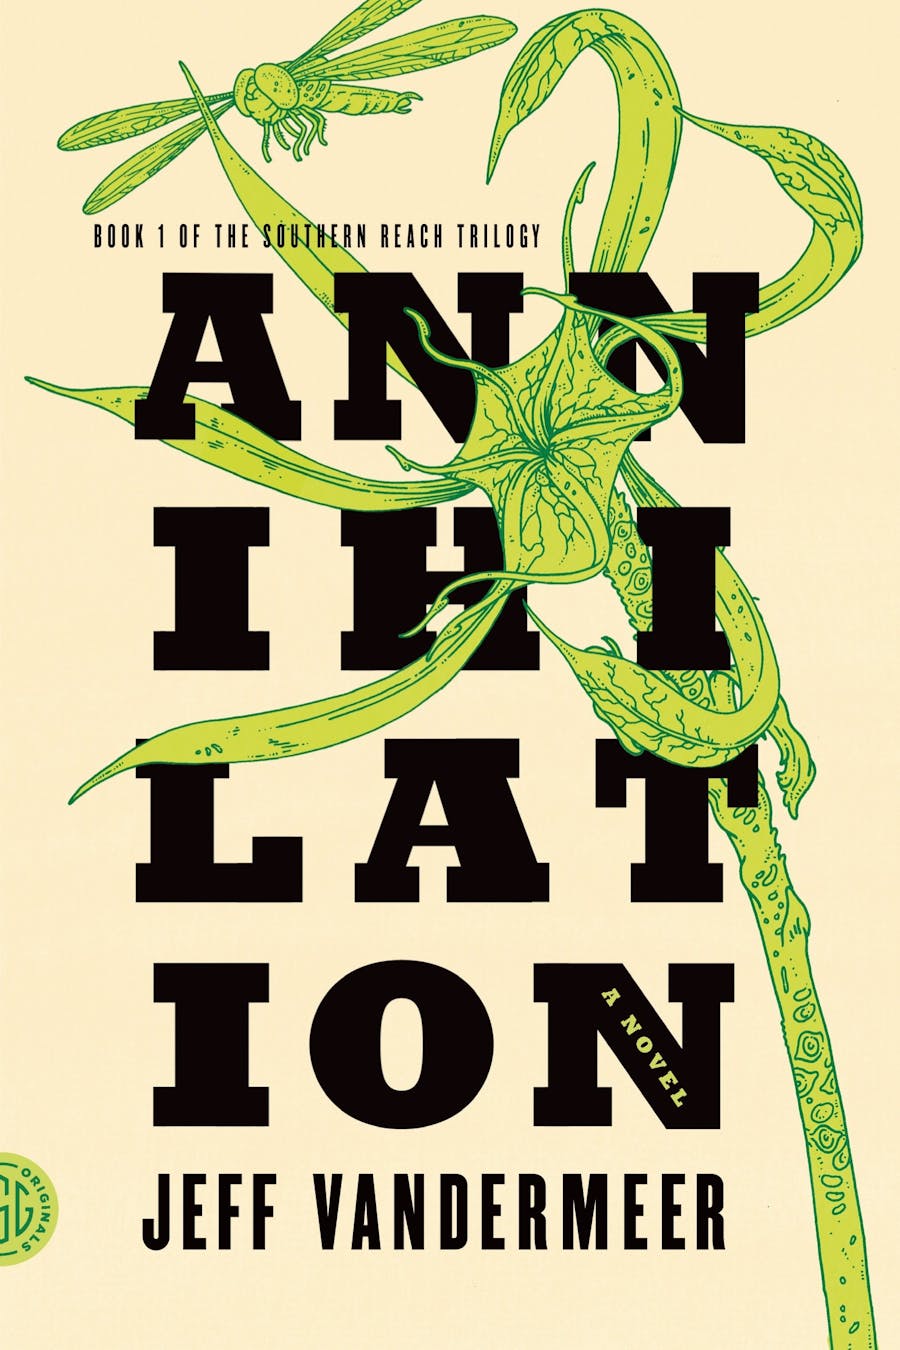 Cover of the novel 'Annihilation' by Jeff VanderMeer, with a green illustration of a dragonfly and a threatening-looking flower